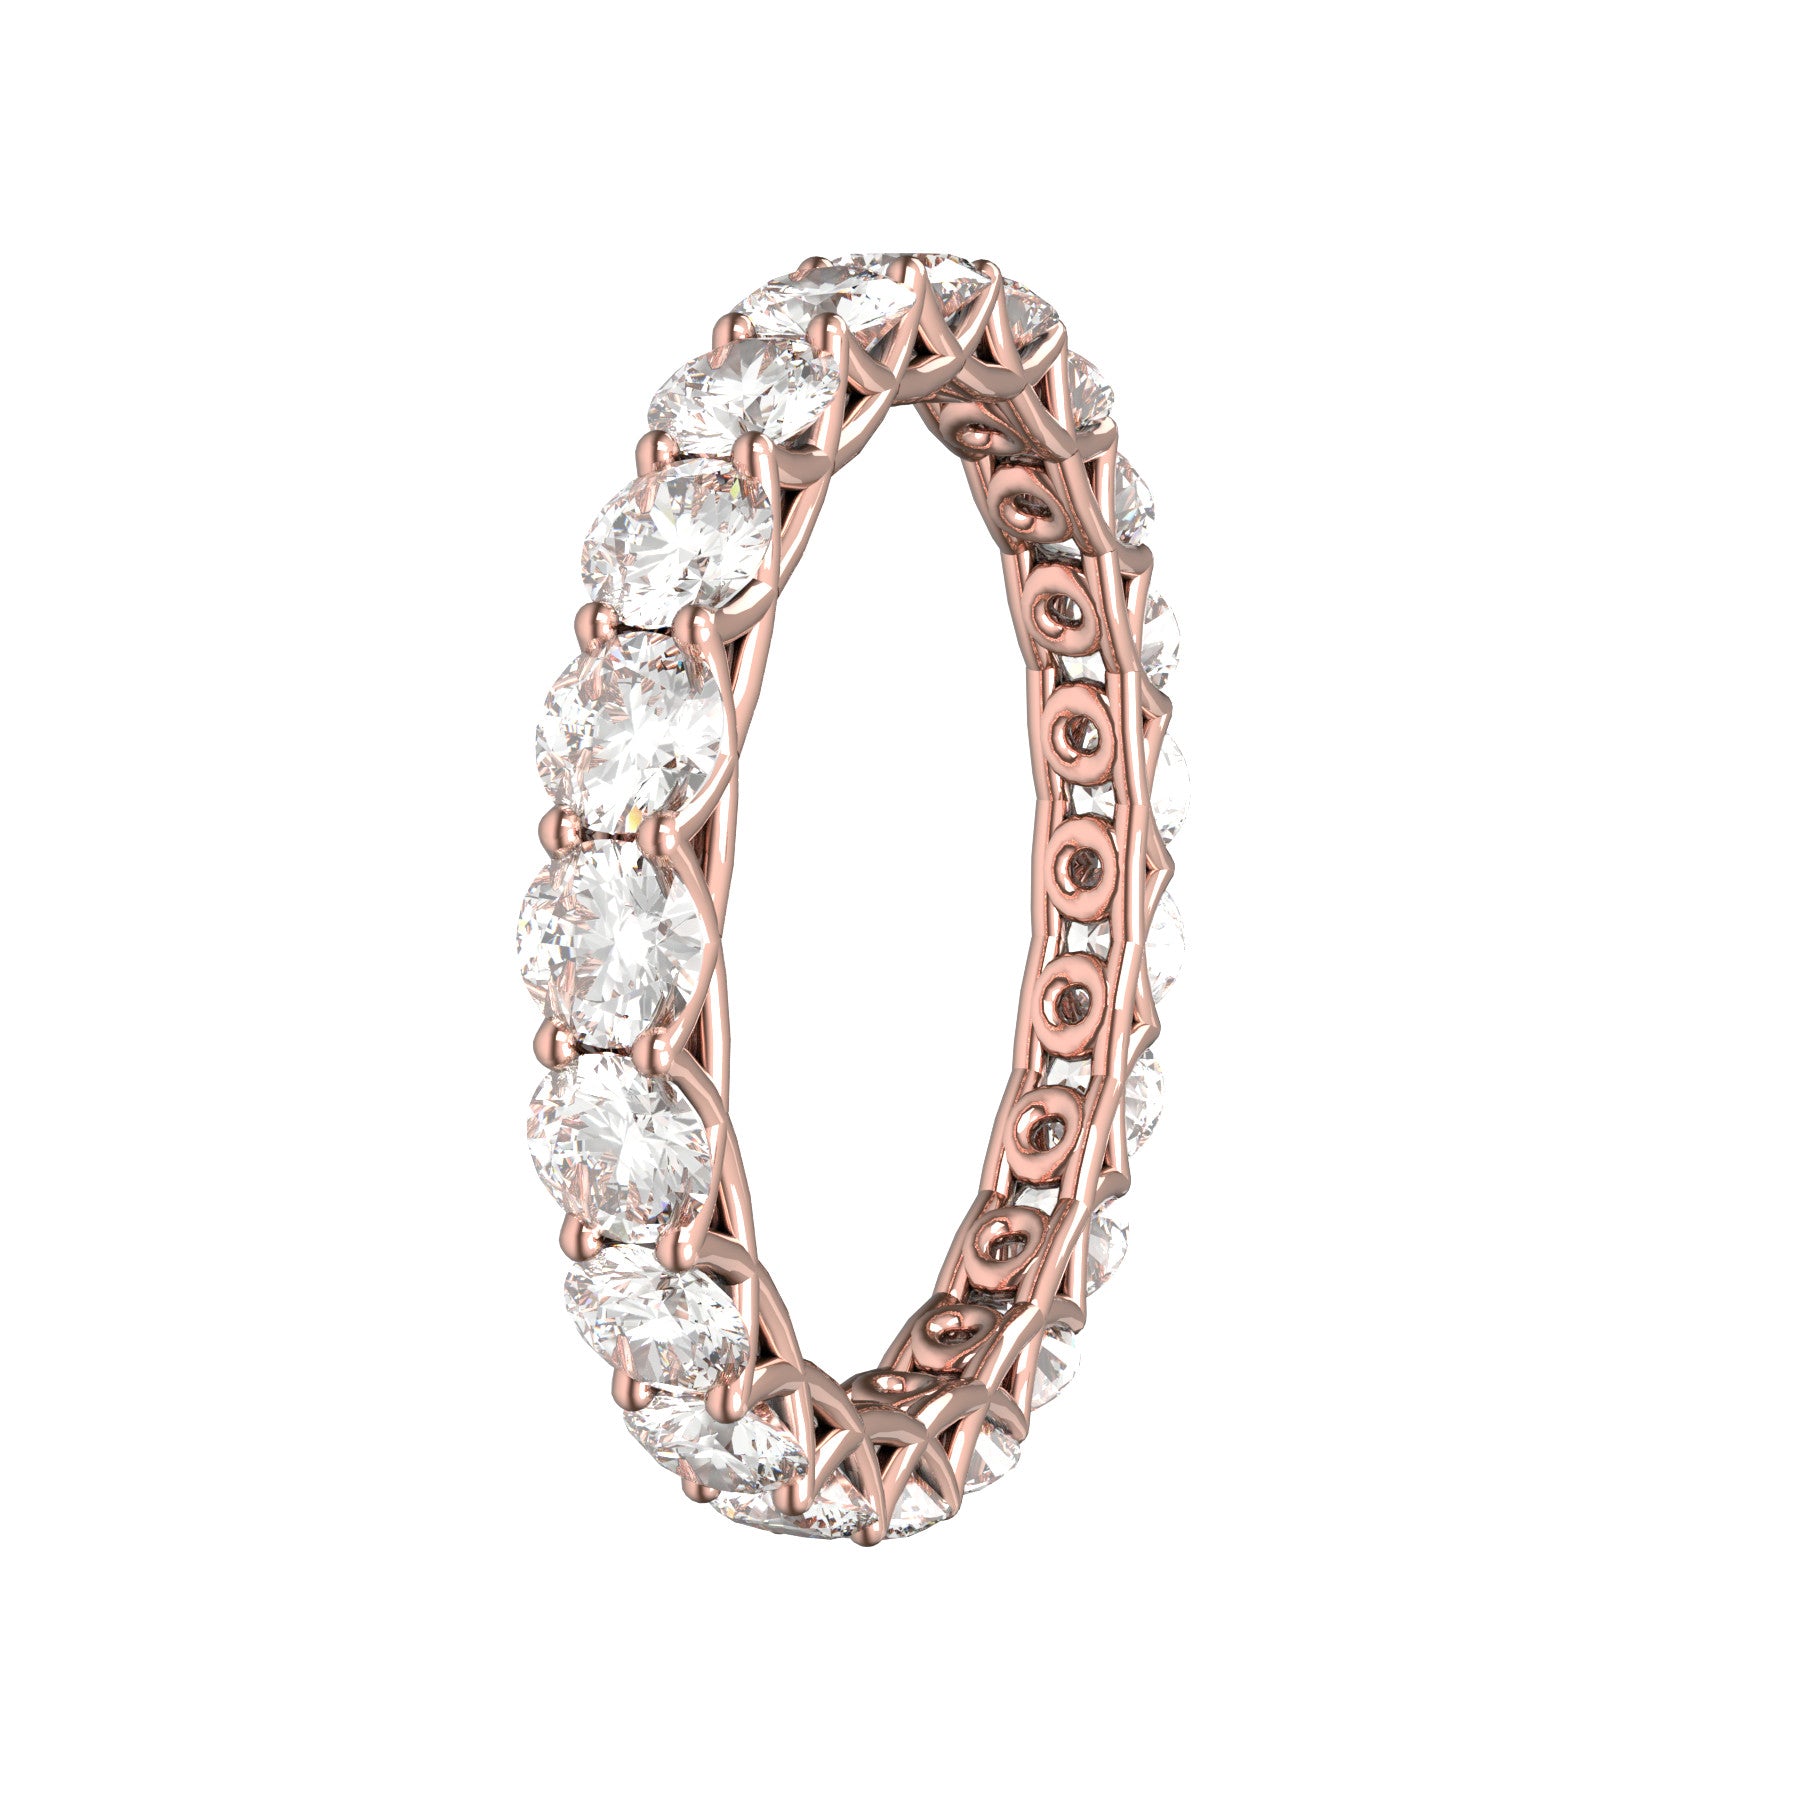 sweet hearts wedding band, 18 K pink gold, 0,10 natural diamonds, weight about 1,90 g. (0.07 oz), width 3,00 mm